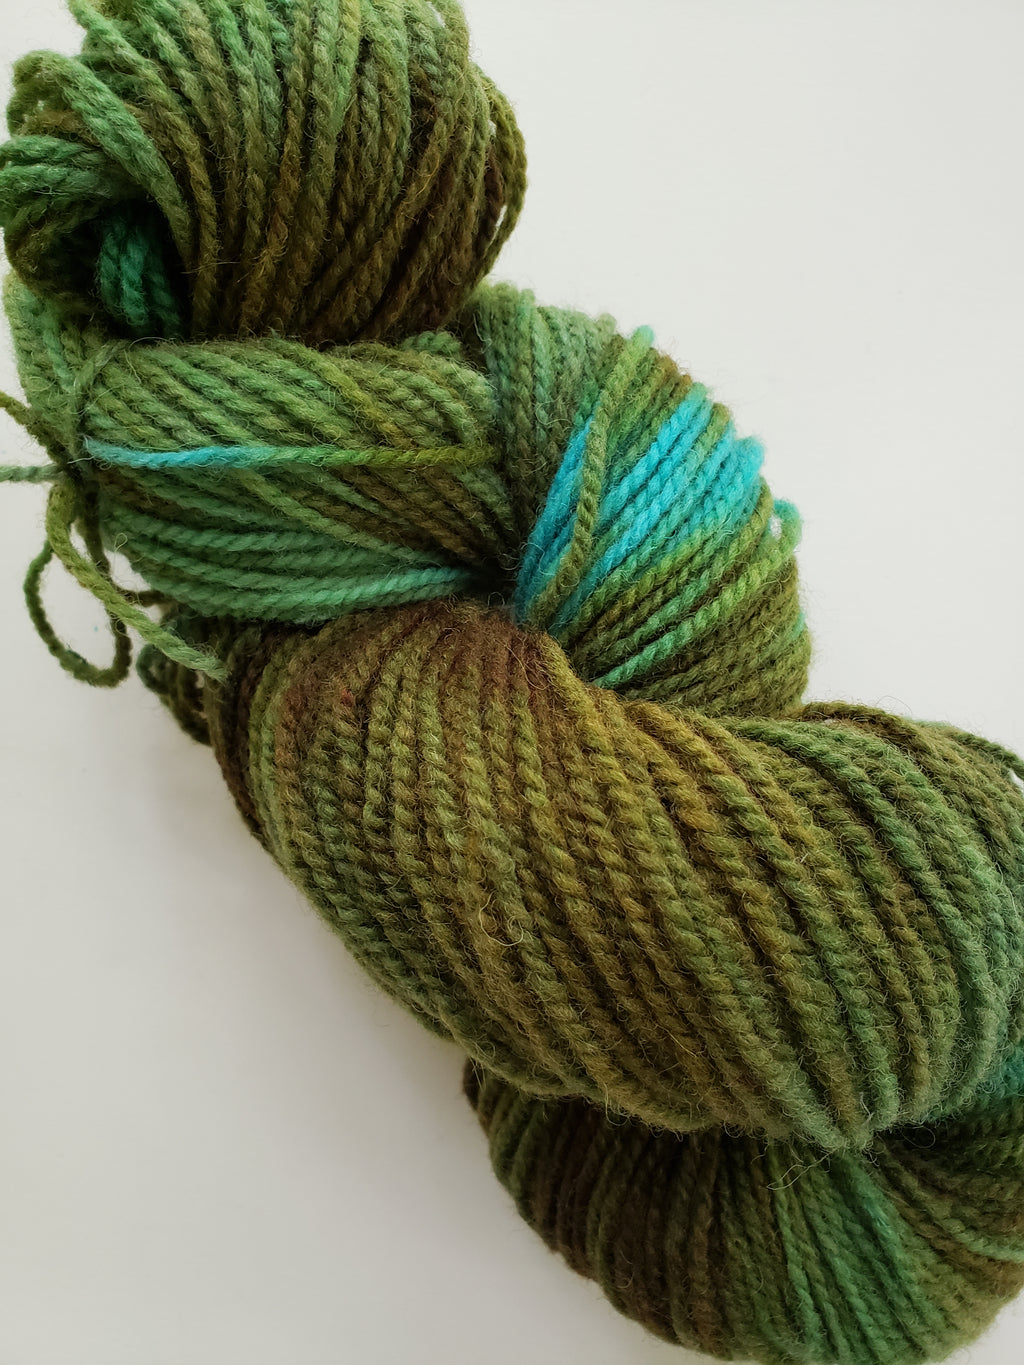 TEA LEAVES -  Hand Dyed Shades of Blue-Green Worsted Yarn for Rug Hooking - RSS230